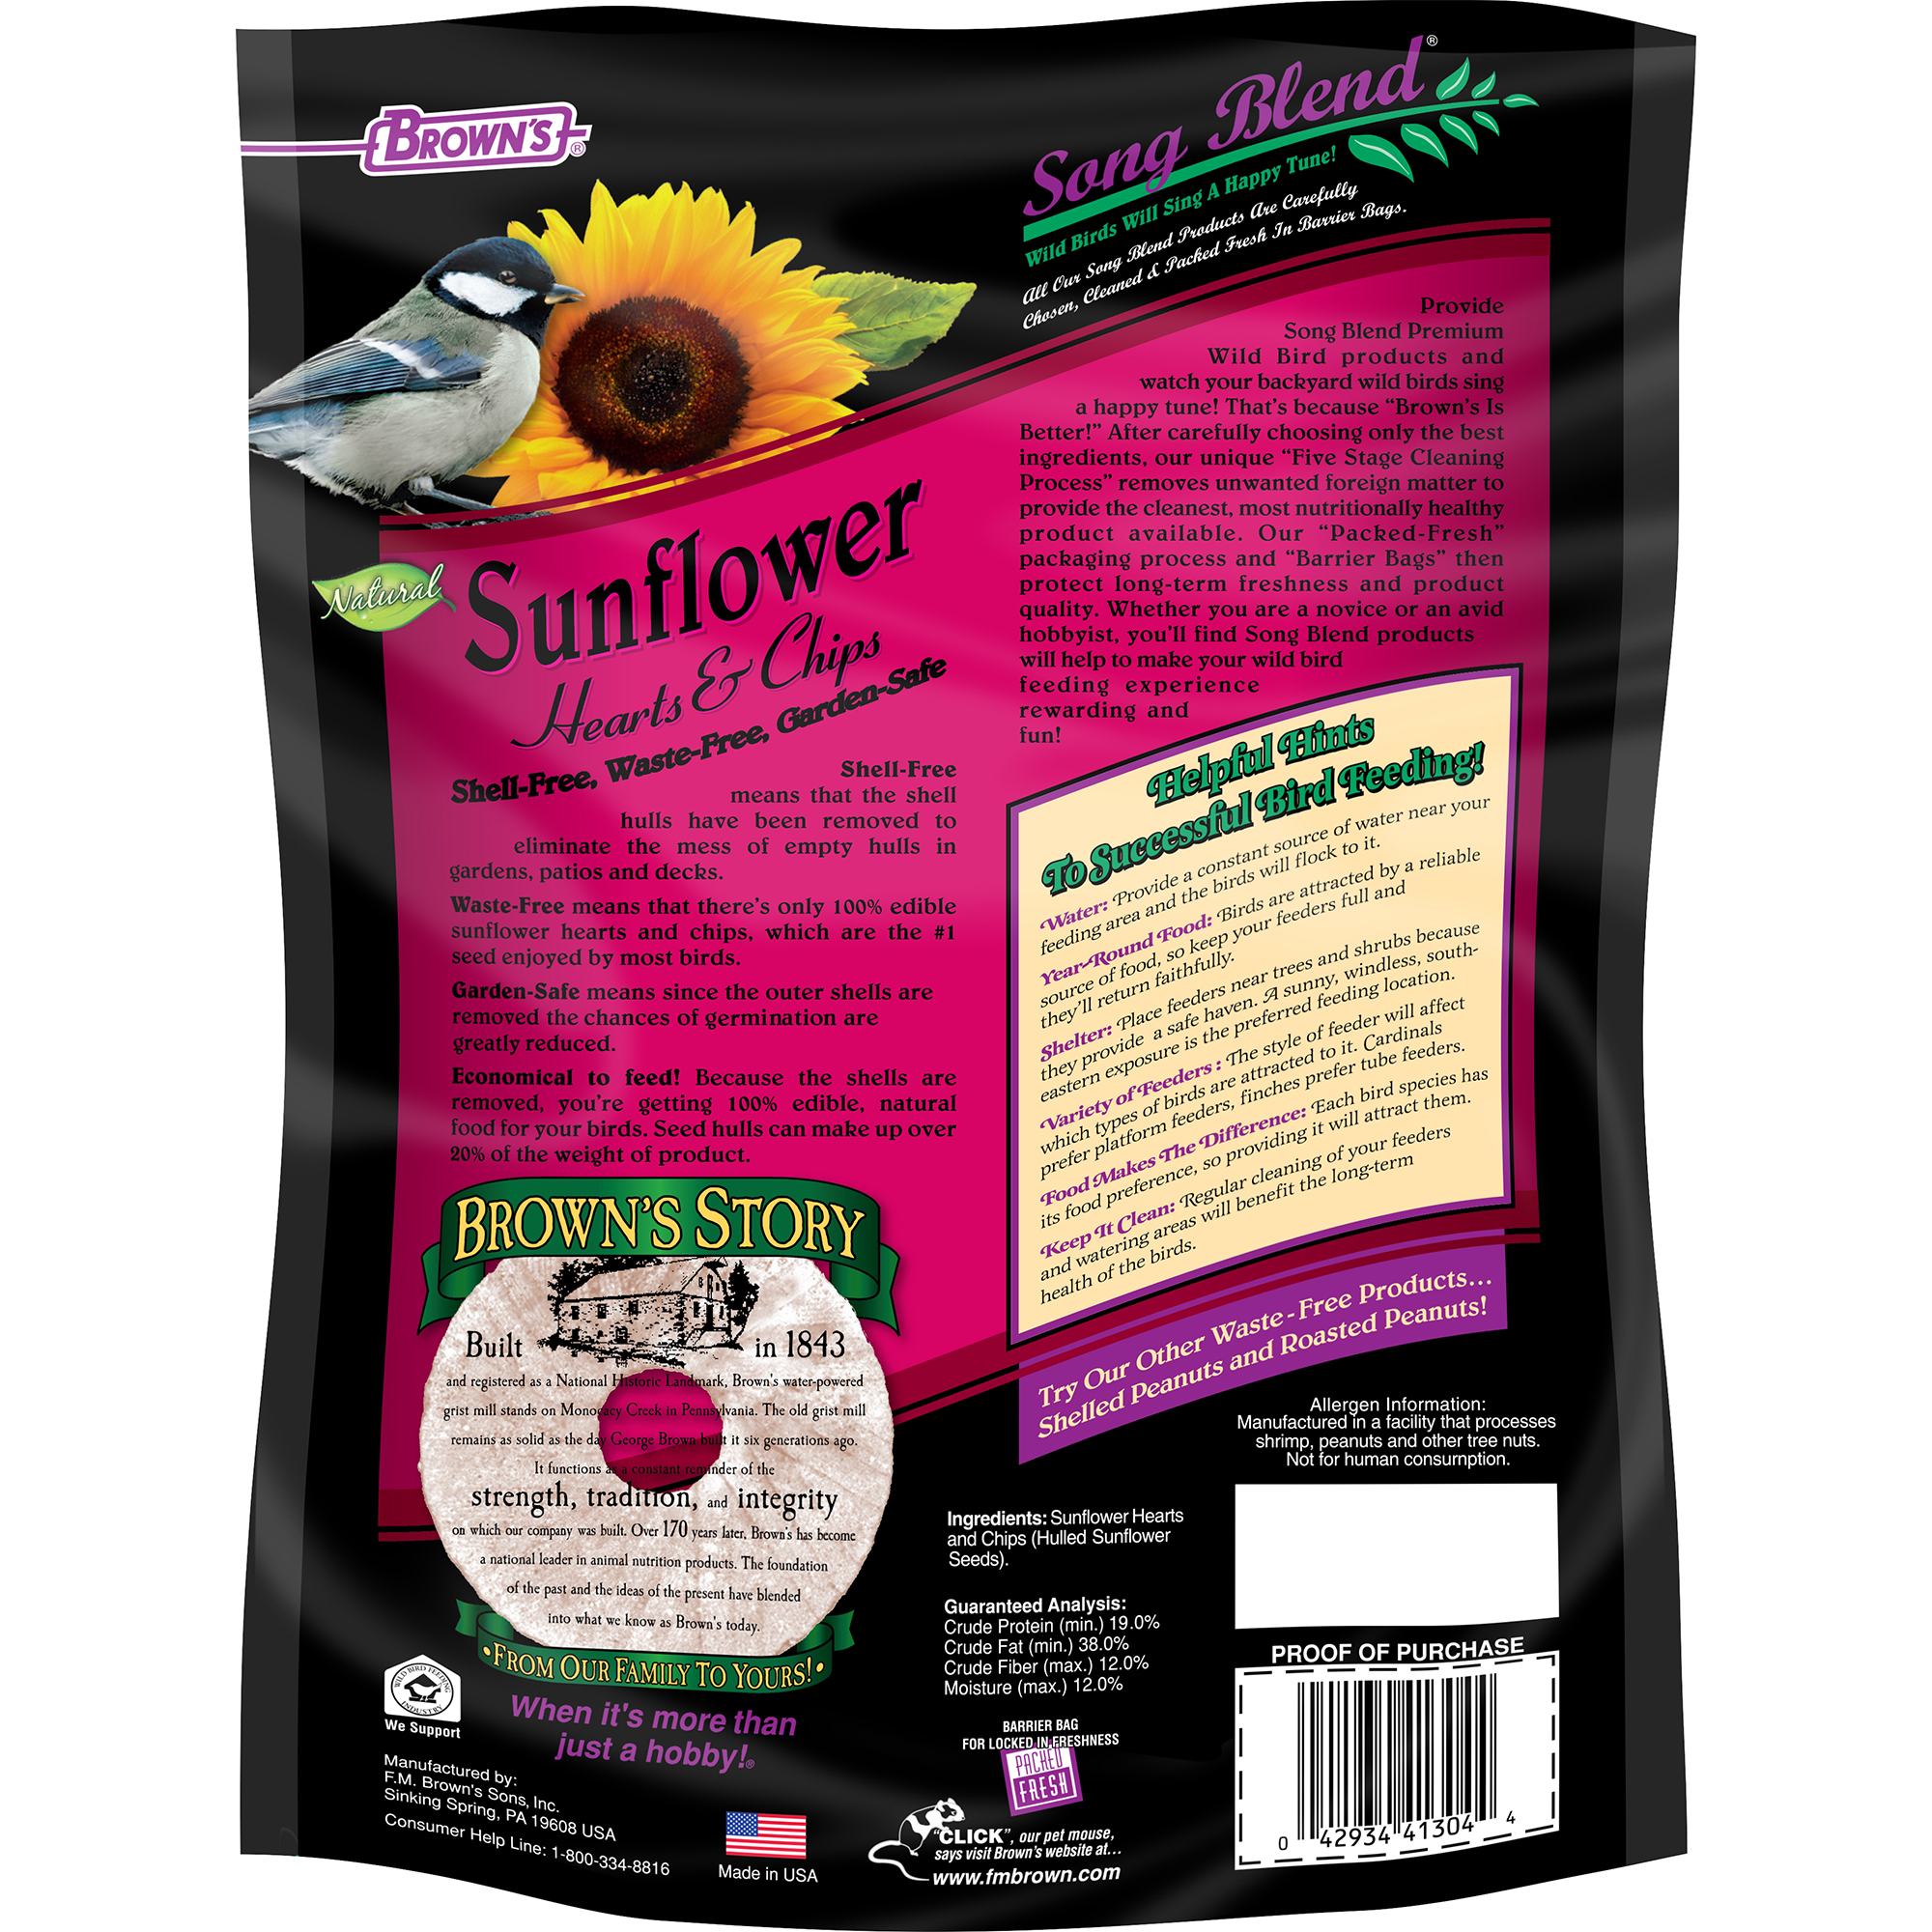 Details about   Wagner's 57051 Sunflower Hearts & Chips 3-Pound Bag 